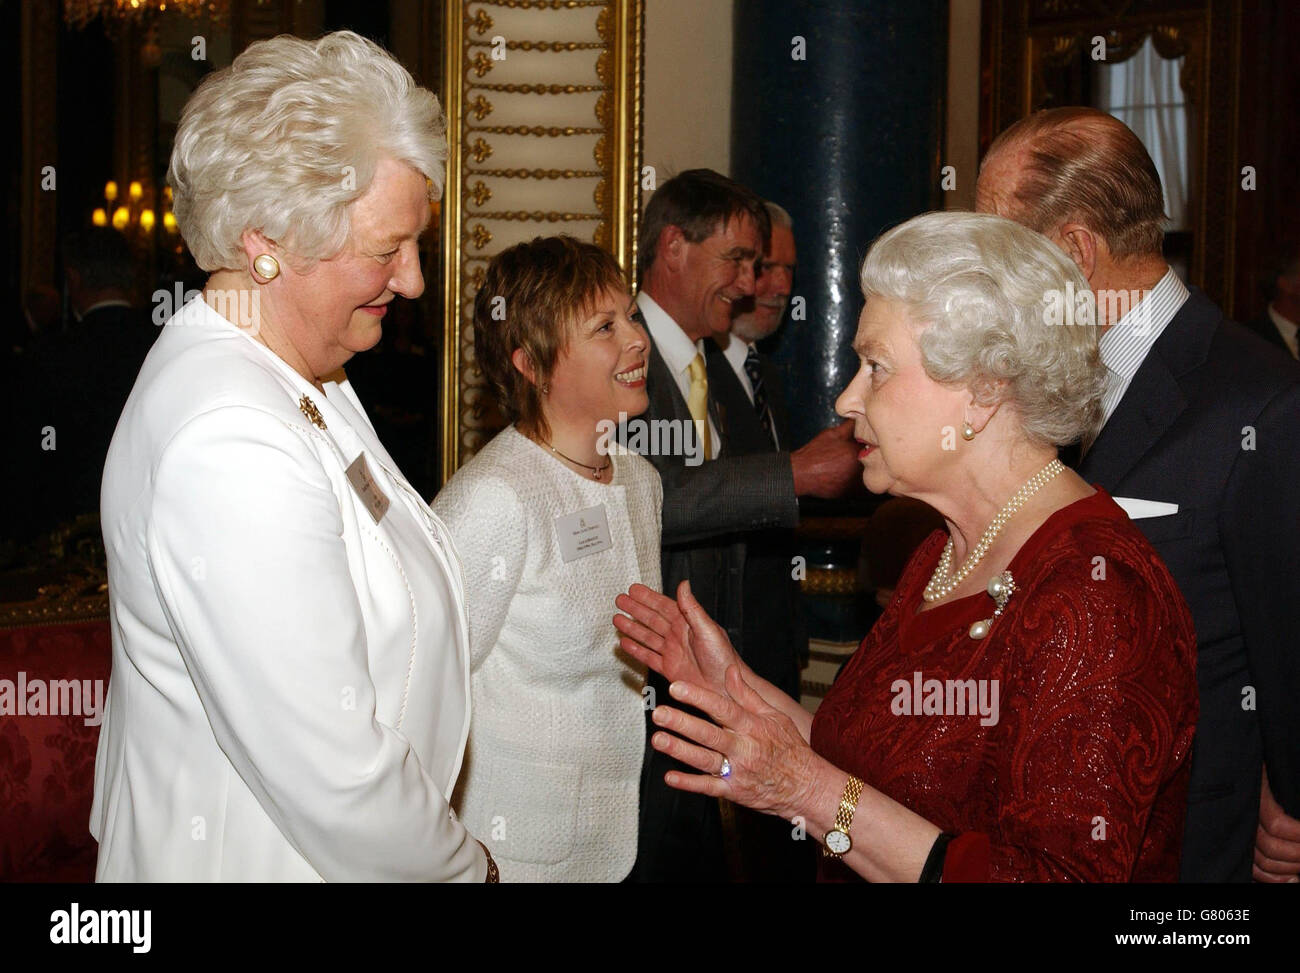 Britain's Queen Elizabeth II talks to Dame Mary Peters who won a Gold Medal in the Pentathlon during the 1972 Munich Olympics, as the Duke of Edinburgh speaks to former gold medallist figure skater Jayne Torville (centre). Stock Photo